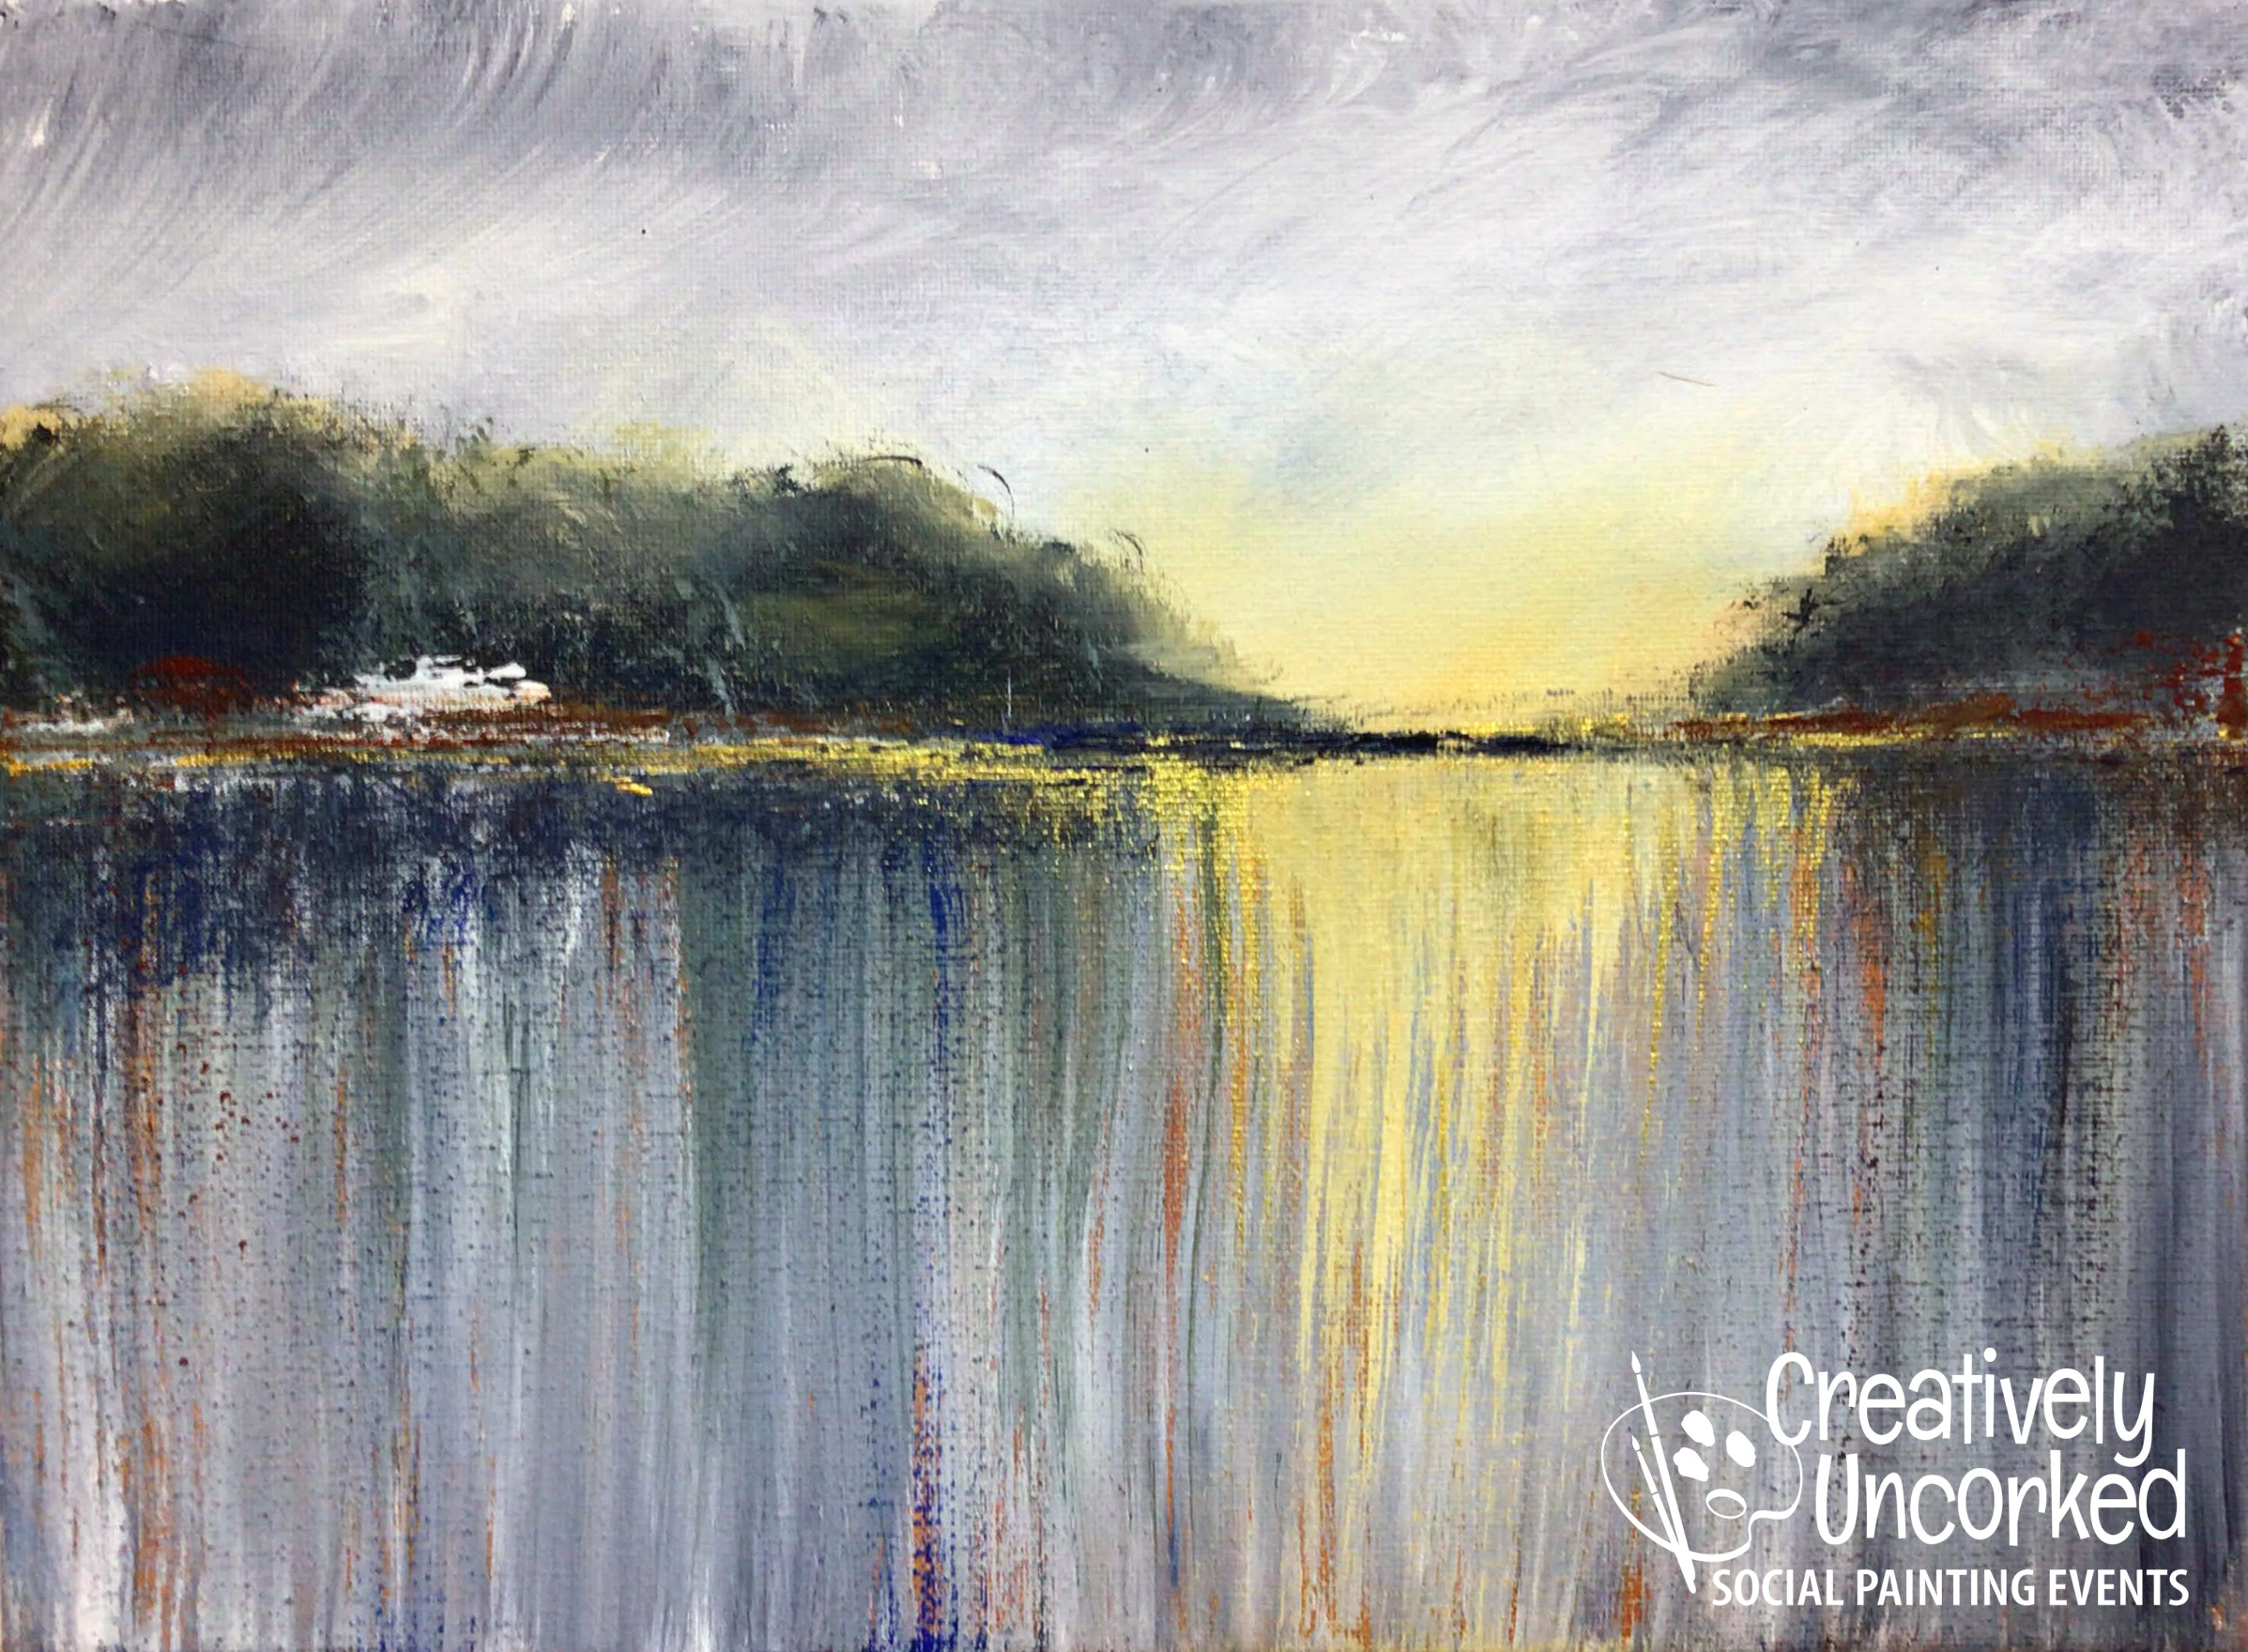 Abstract November Landscape from Creatively Uncorked http://creativelyuncorked.com/